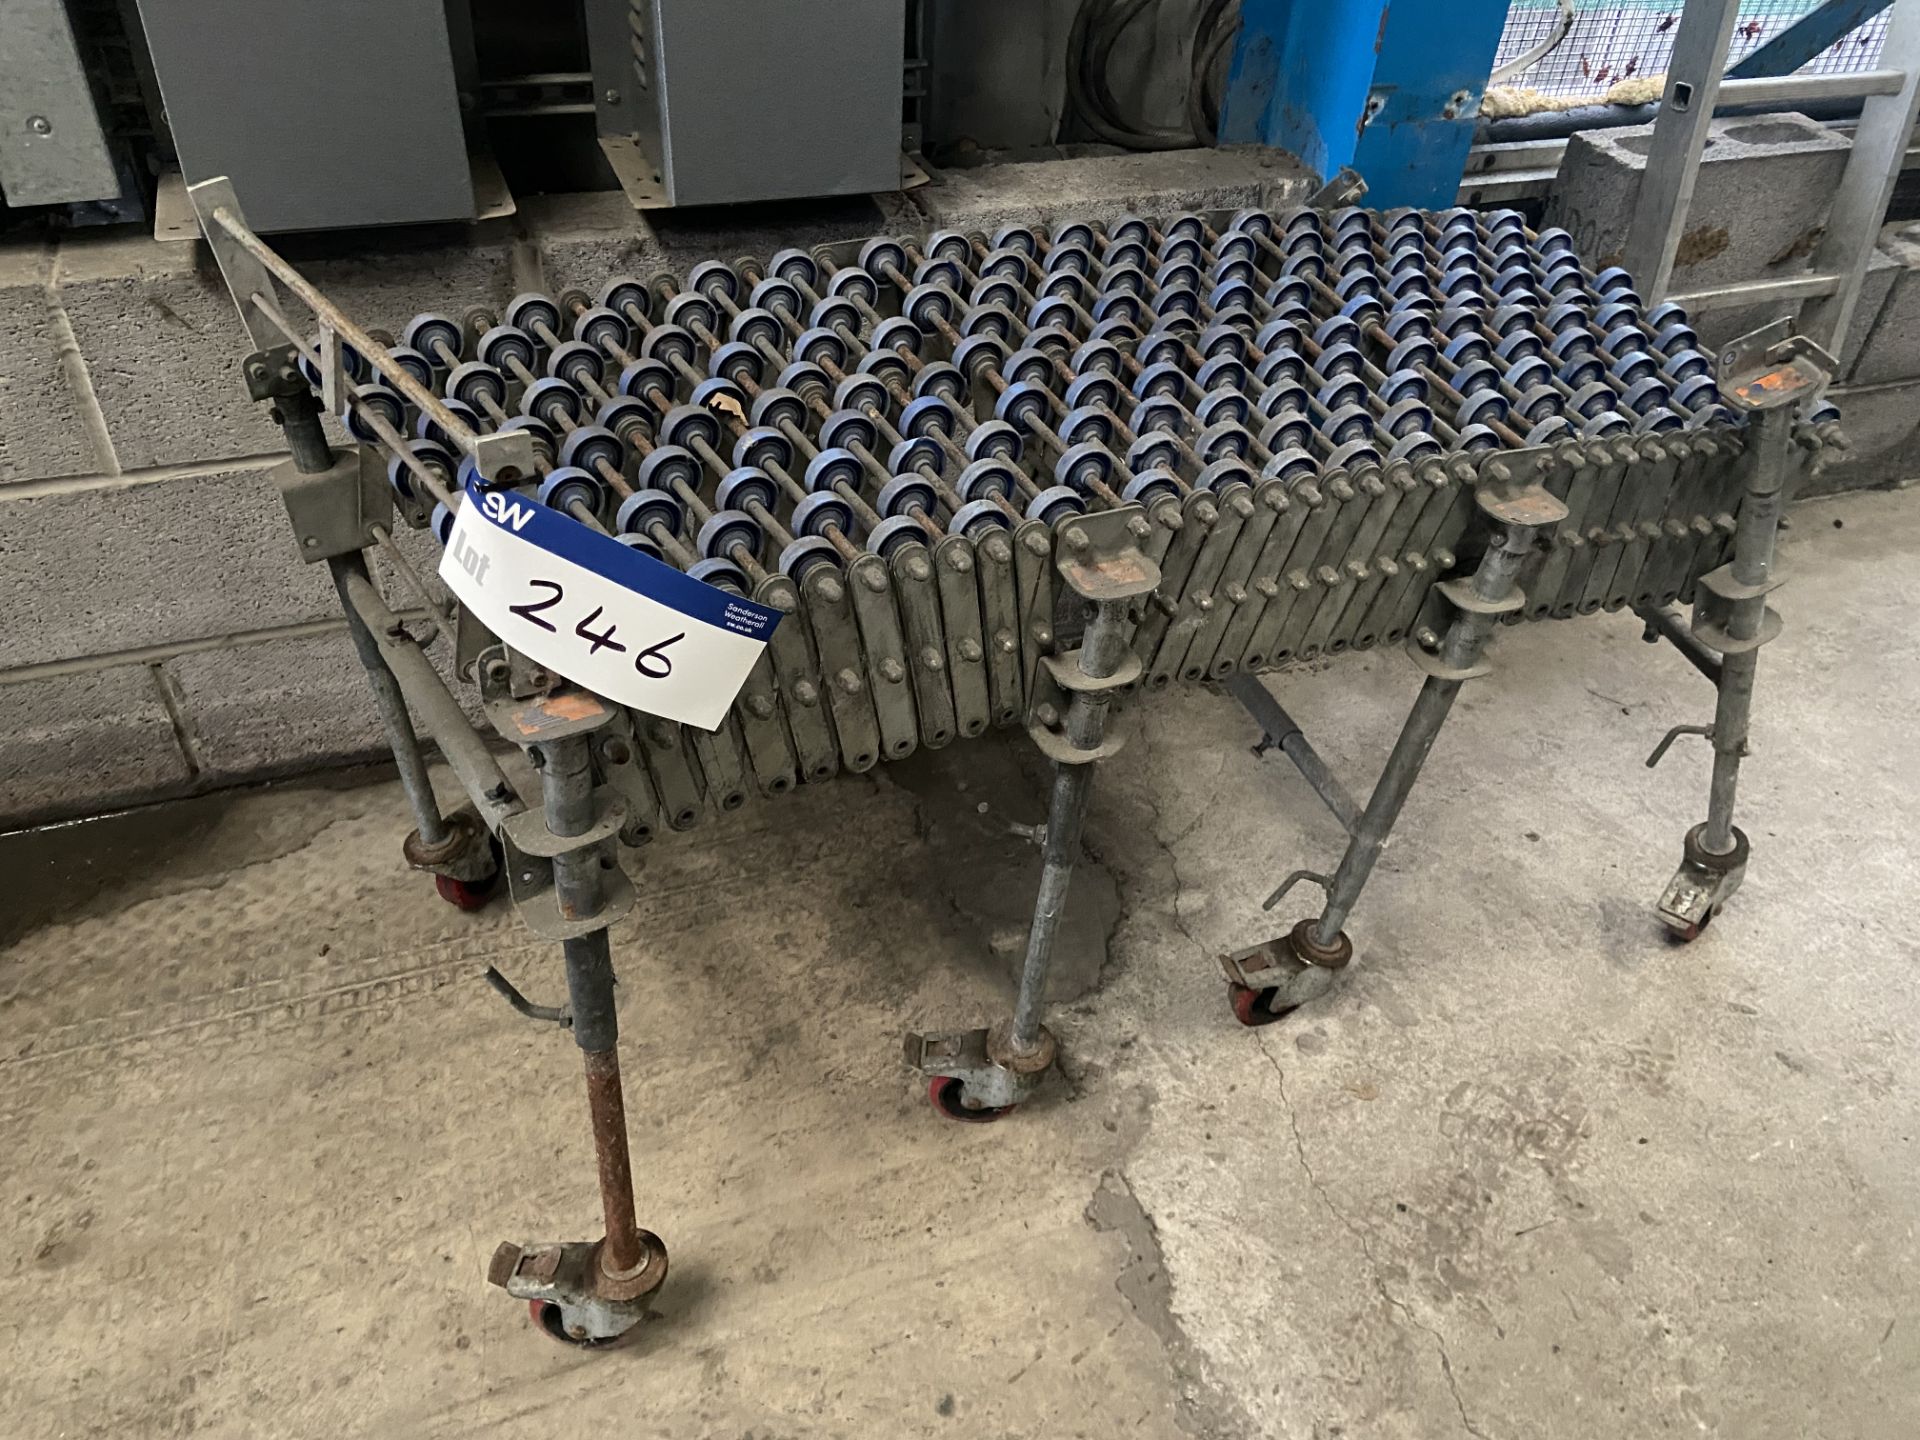 500mm wide Roll Concertina Mobile Conveyor, approx. 1.2m long when closed Please read the